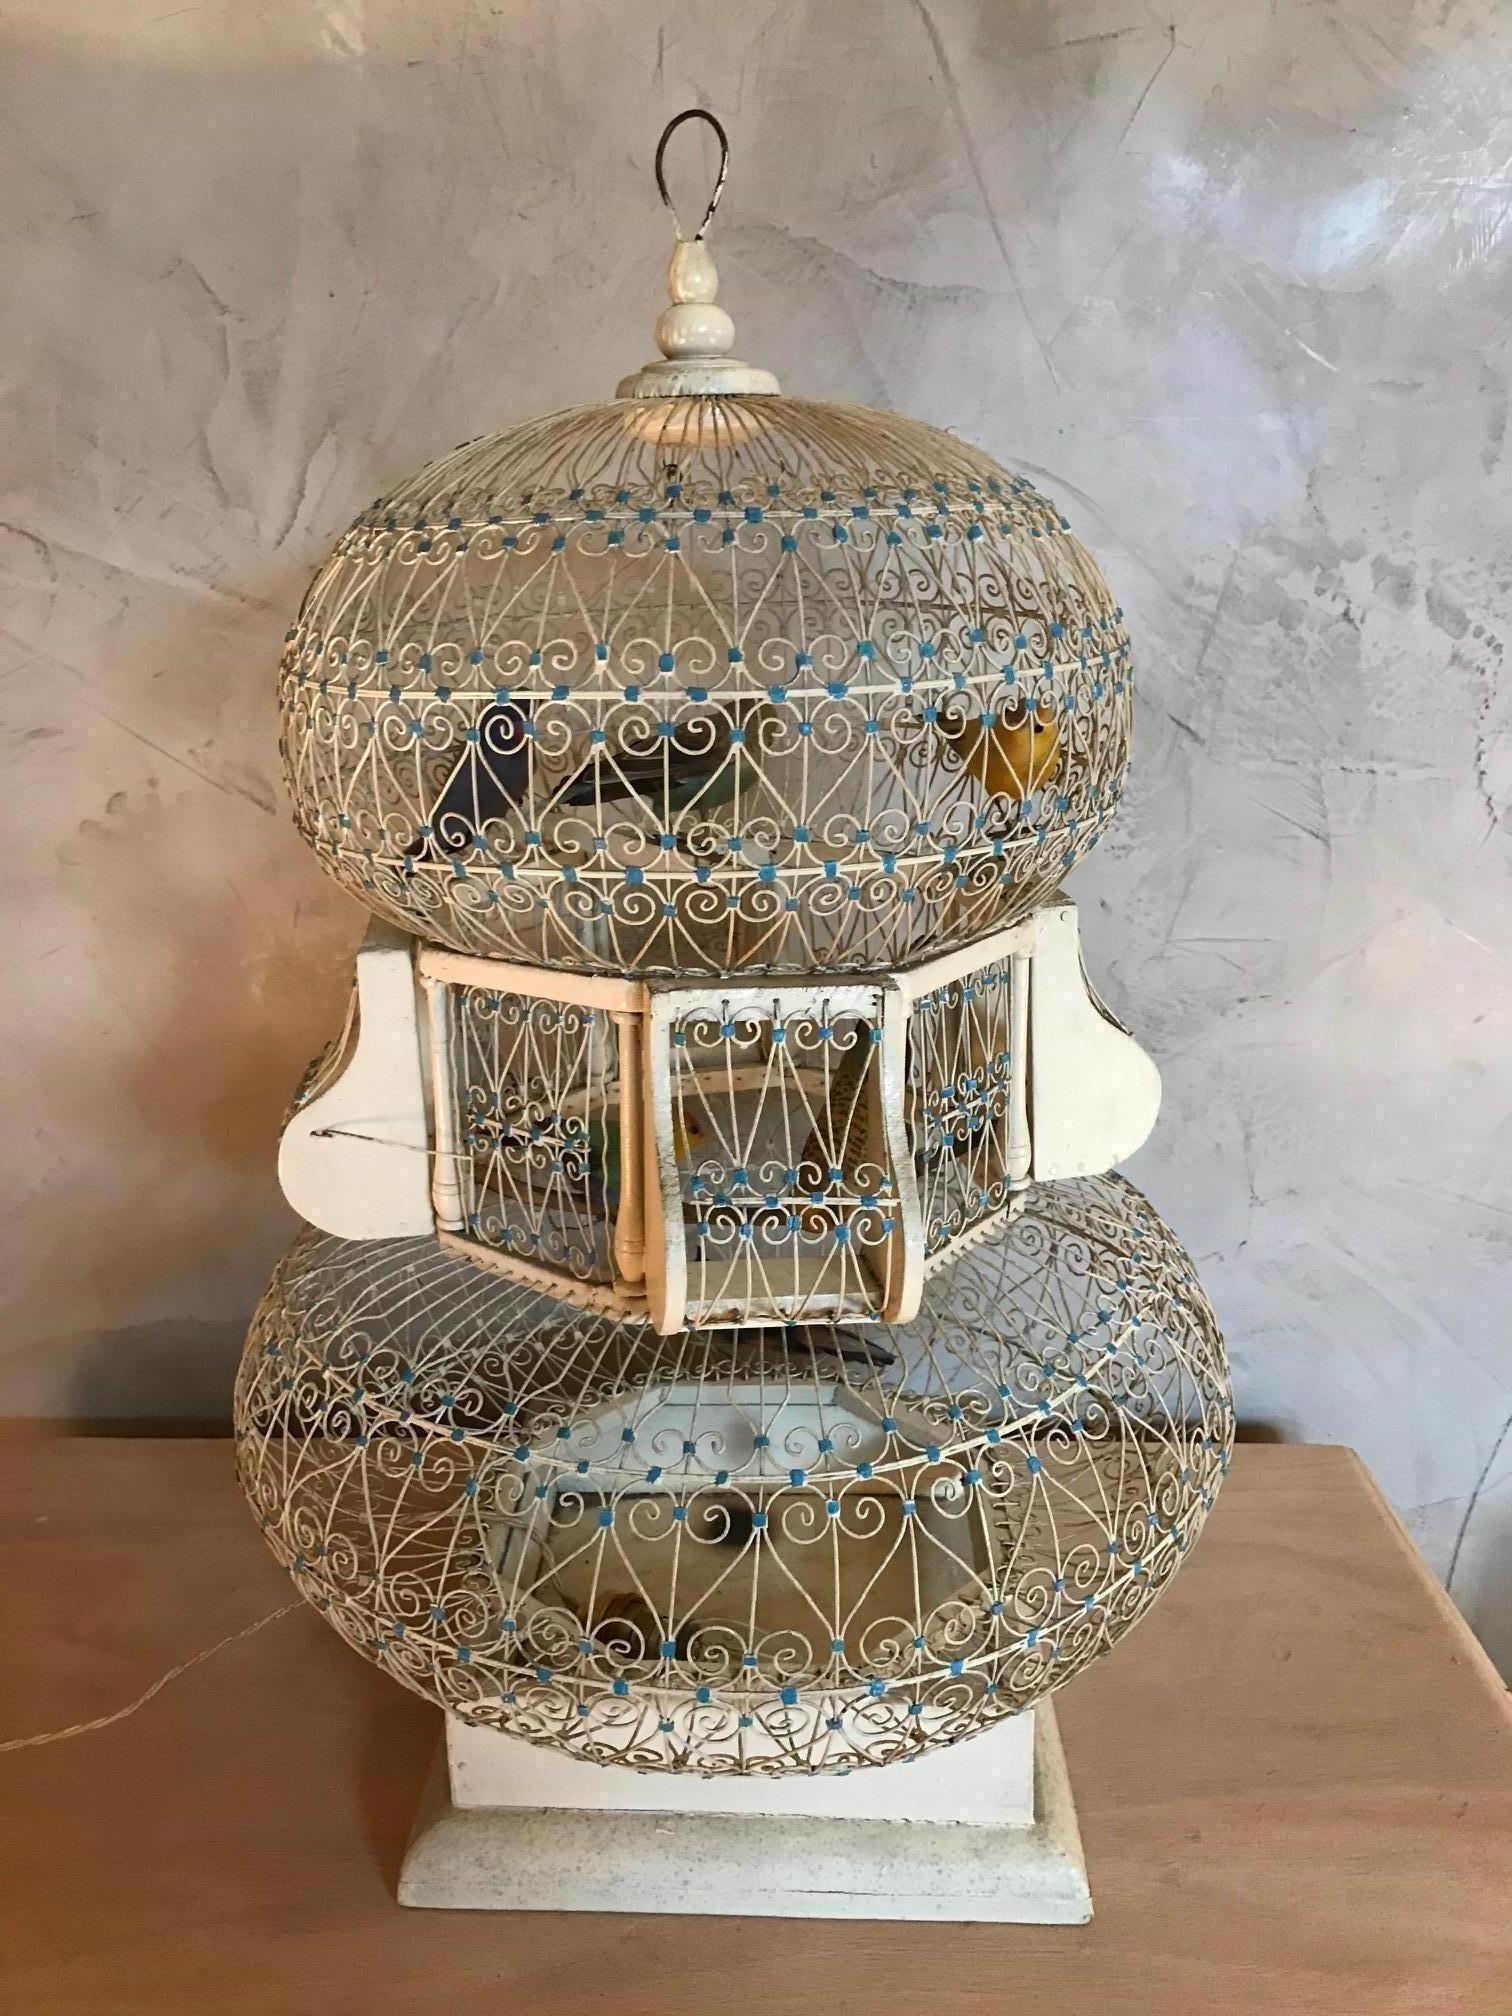 Beautiful 20th century French white metal bird cage from the 1920s.
Many birds in the cage. There is an opening door to move the birds.
We put a bulb on the bottom to enlightened the cage, that make a beautiful light.
Very nice quality.